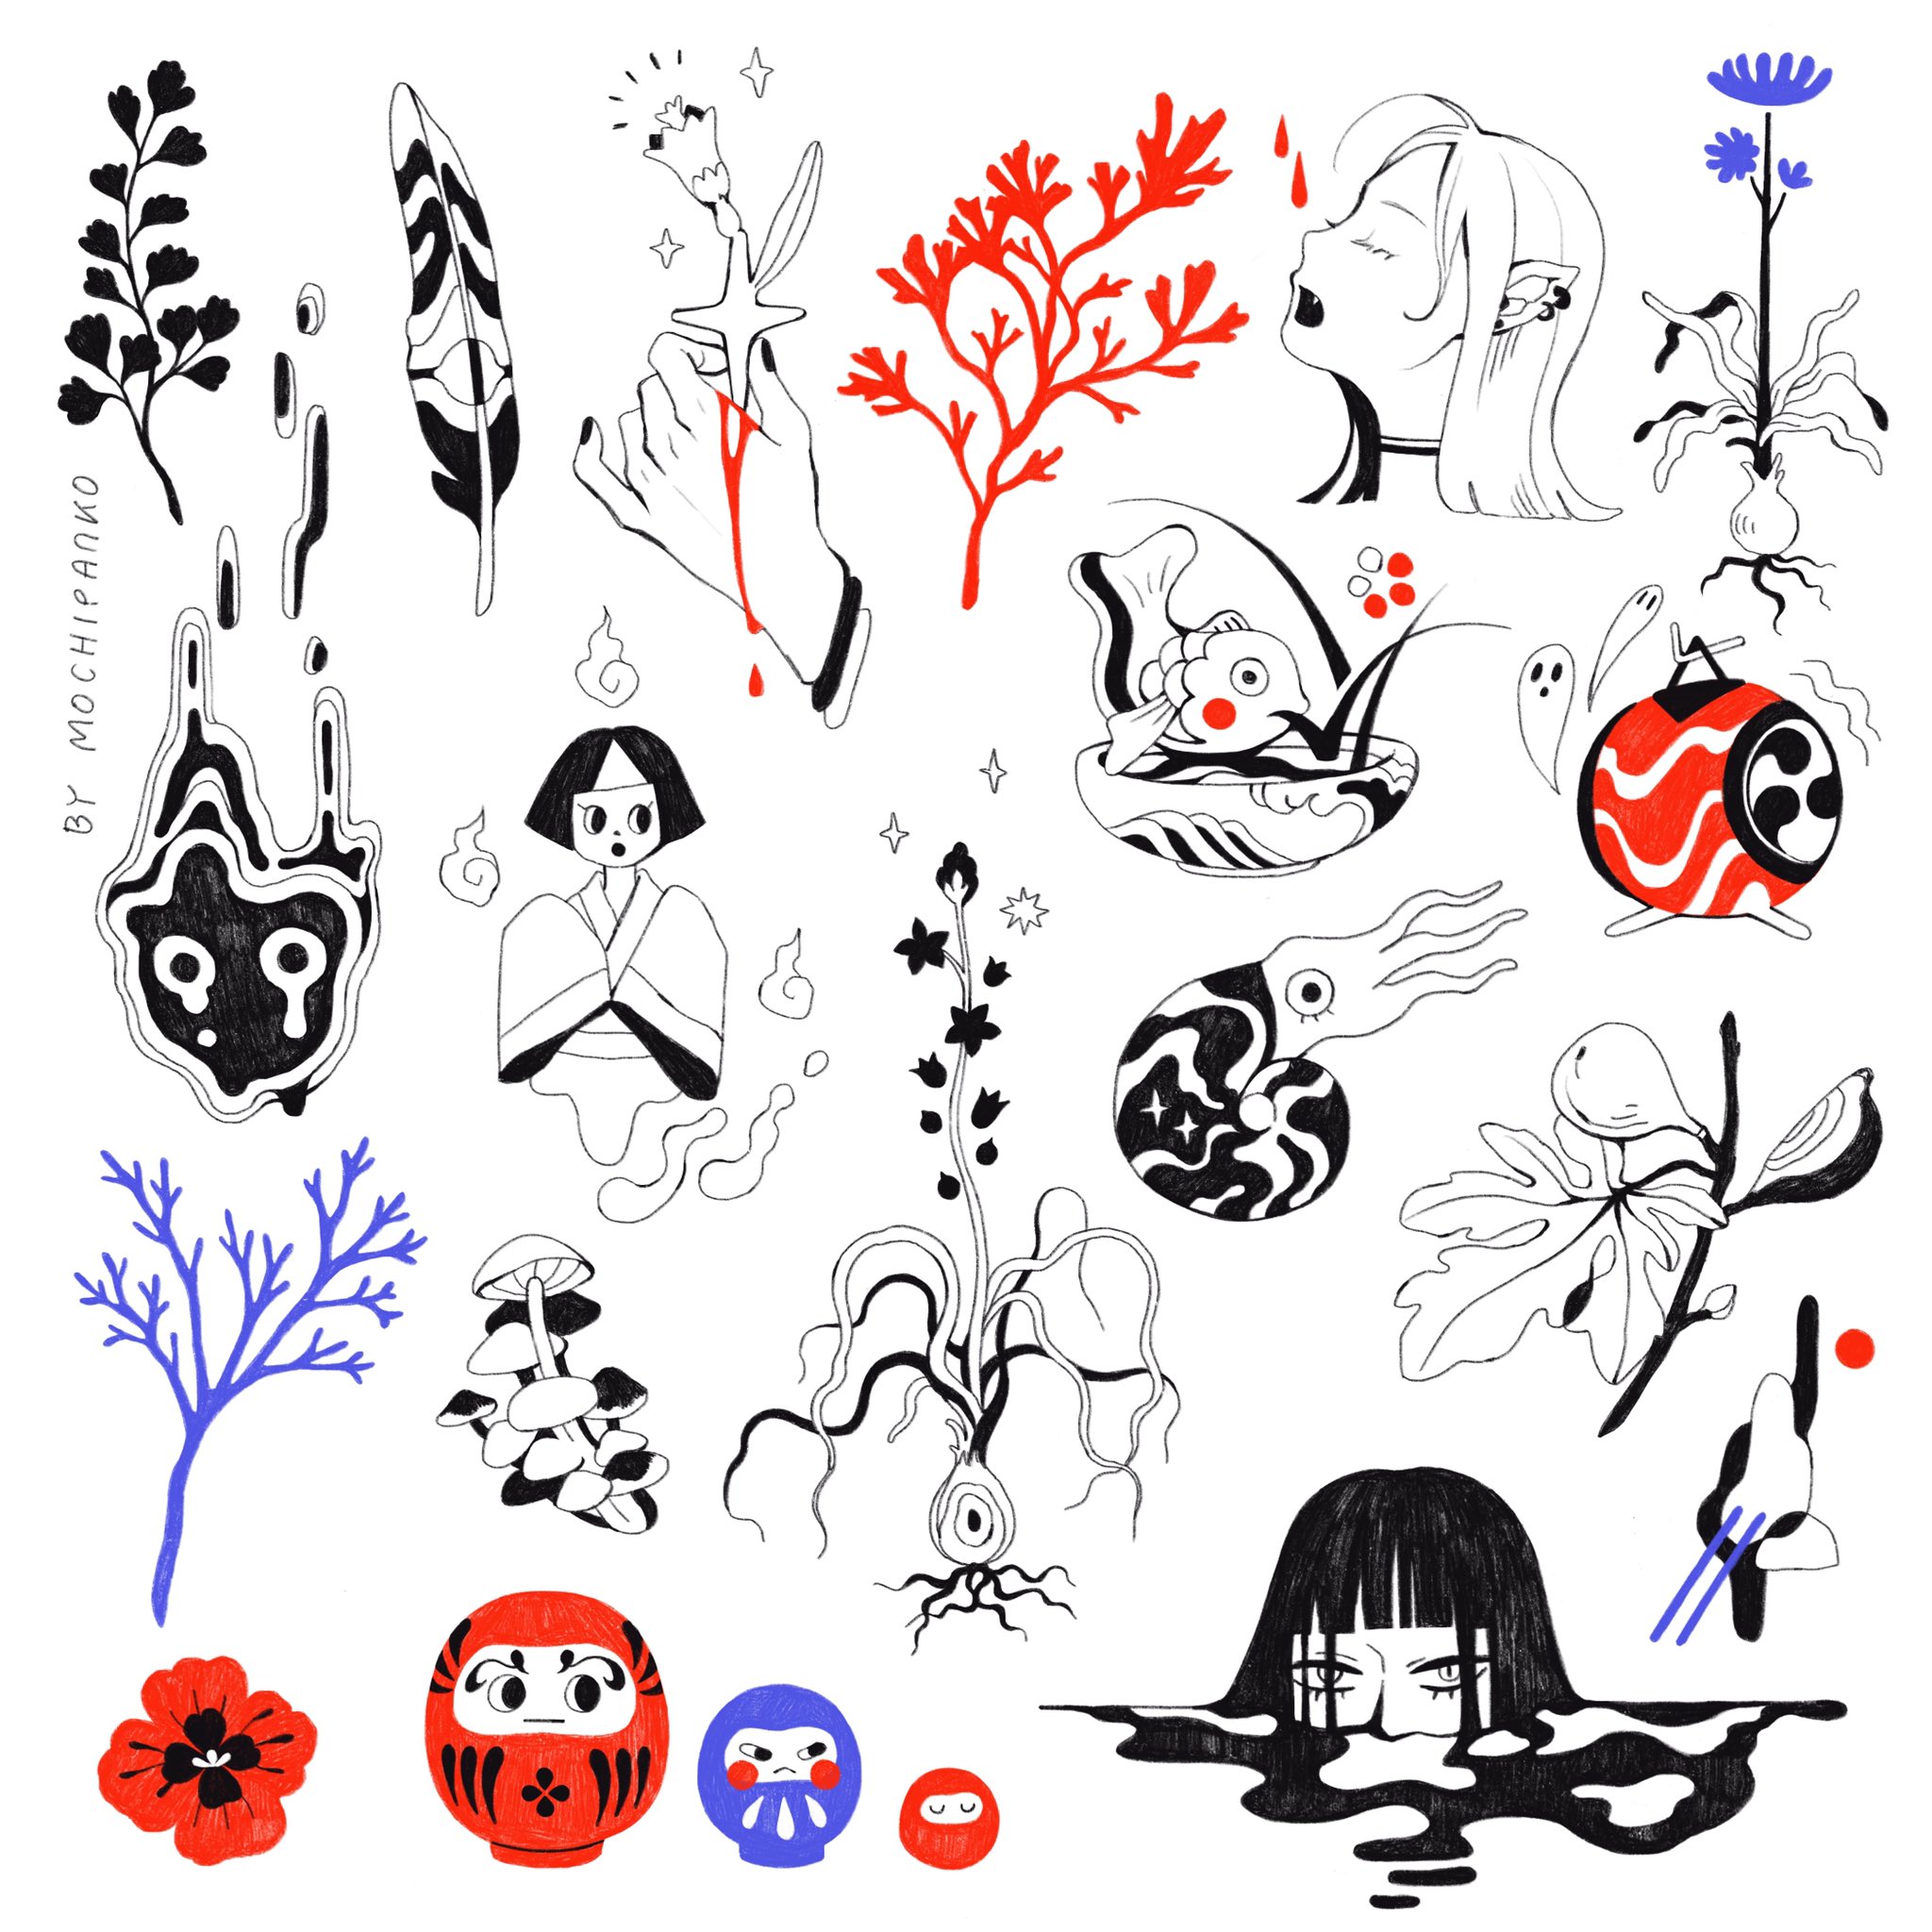 Atomic Tattoos Citrus Park Mall 813.926.1111 - Spooky Tattoo Flash sheet  designed by our artist Bryant Kinney | Facebook